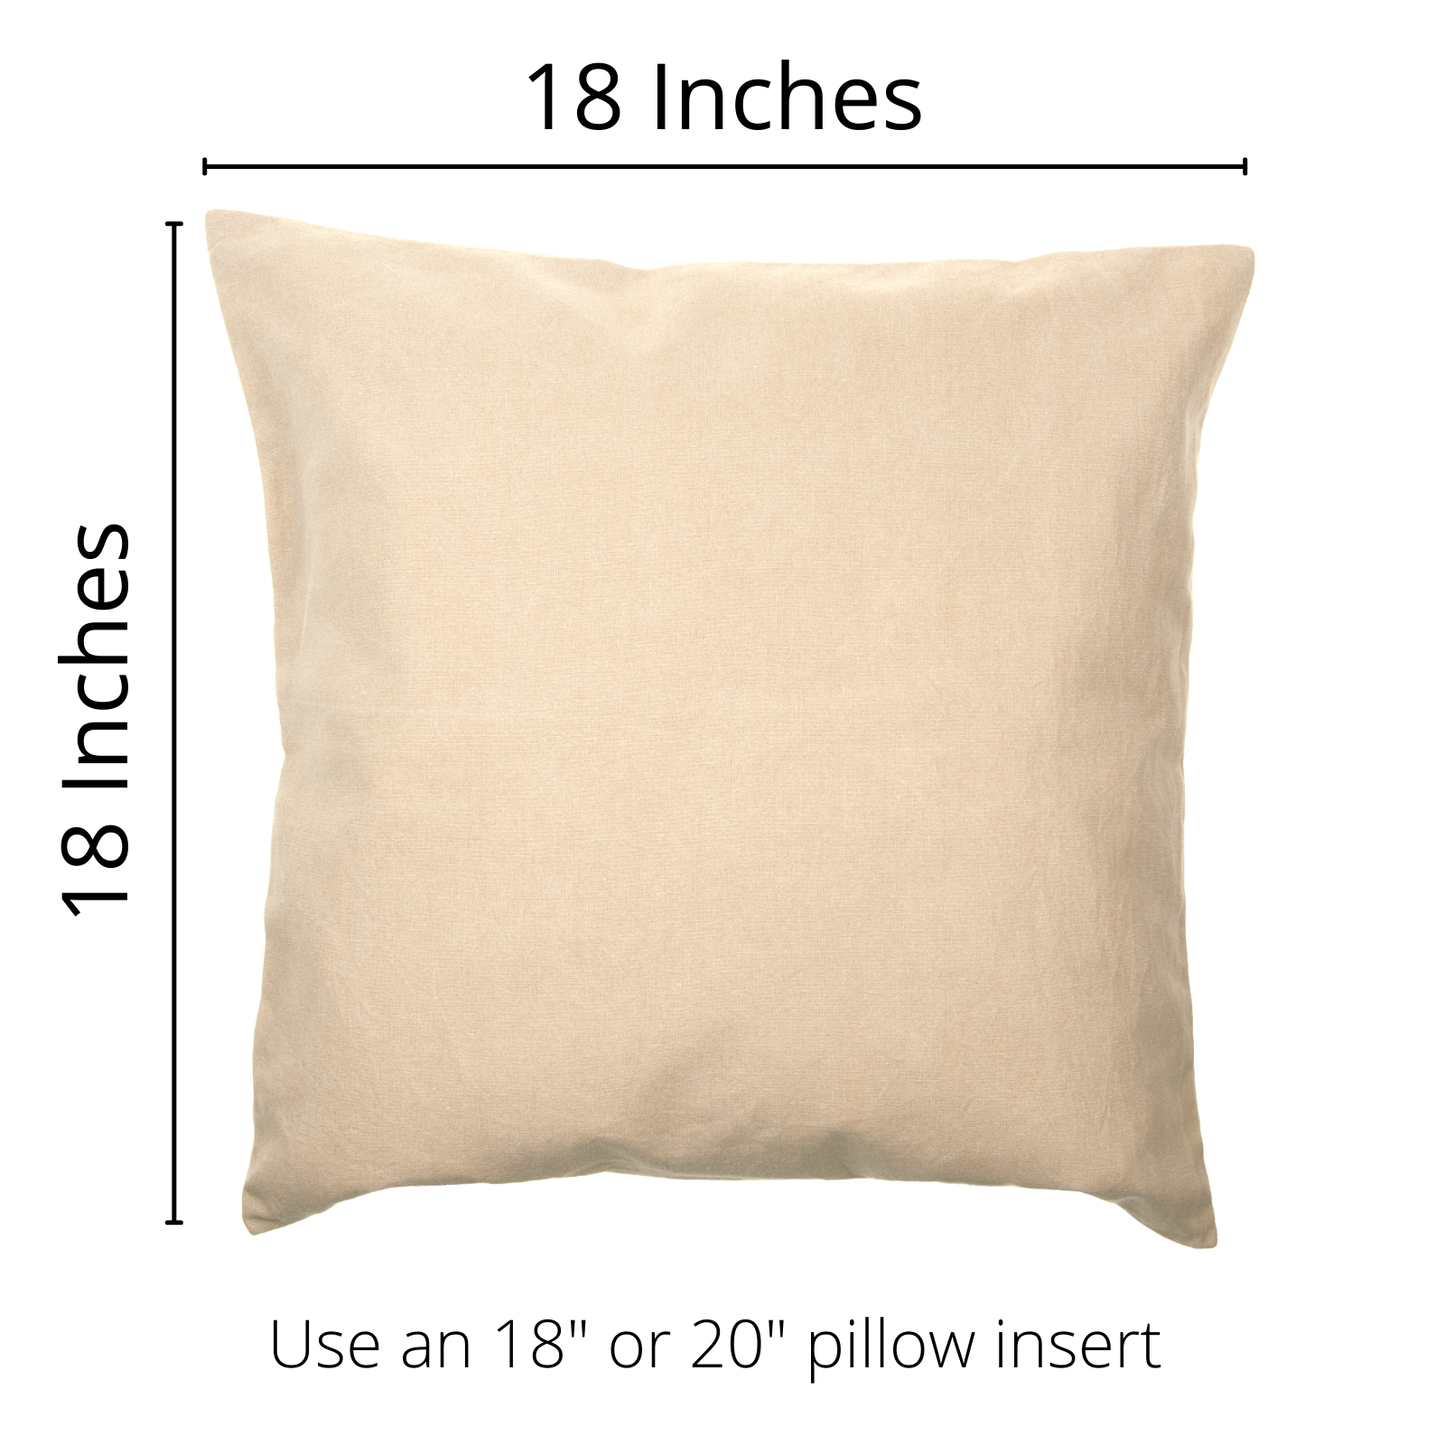 Theodore Roosevelt Sunglasses Pillow Cover